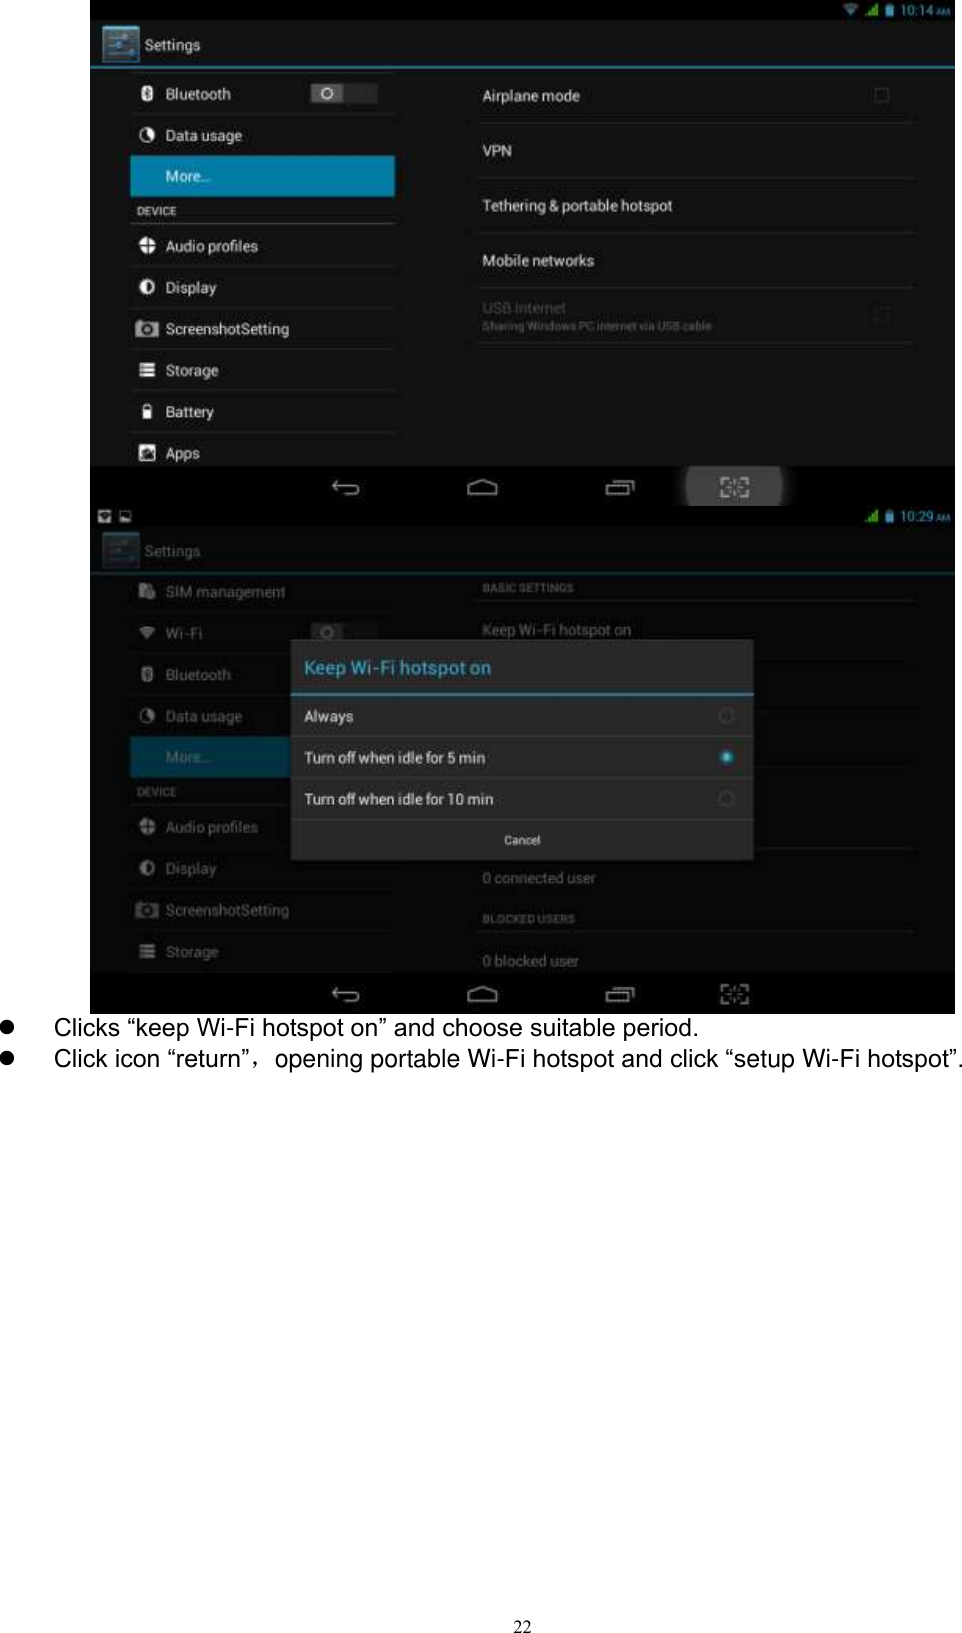      22    Clicks “keep Wi-Fi hotspot on” and choose suitable period.    Click icon “return”，opening portable Wi-Fi hotspot and click “setup Wi-Fi hotspot”.   